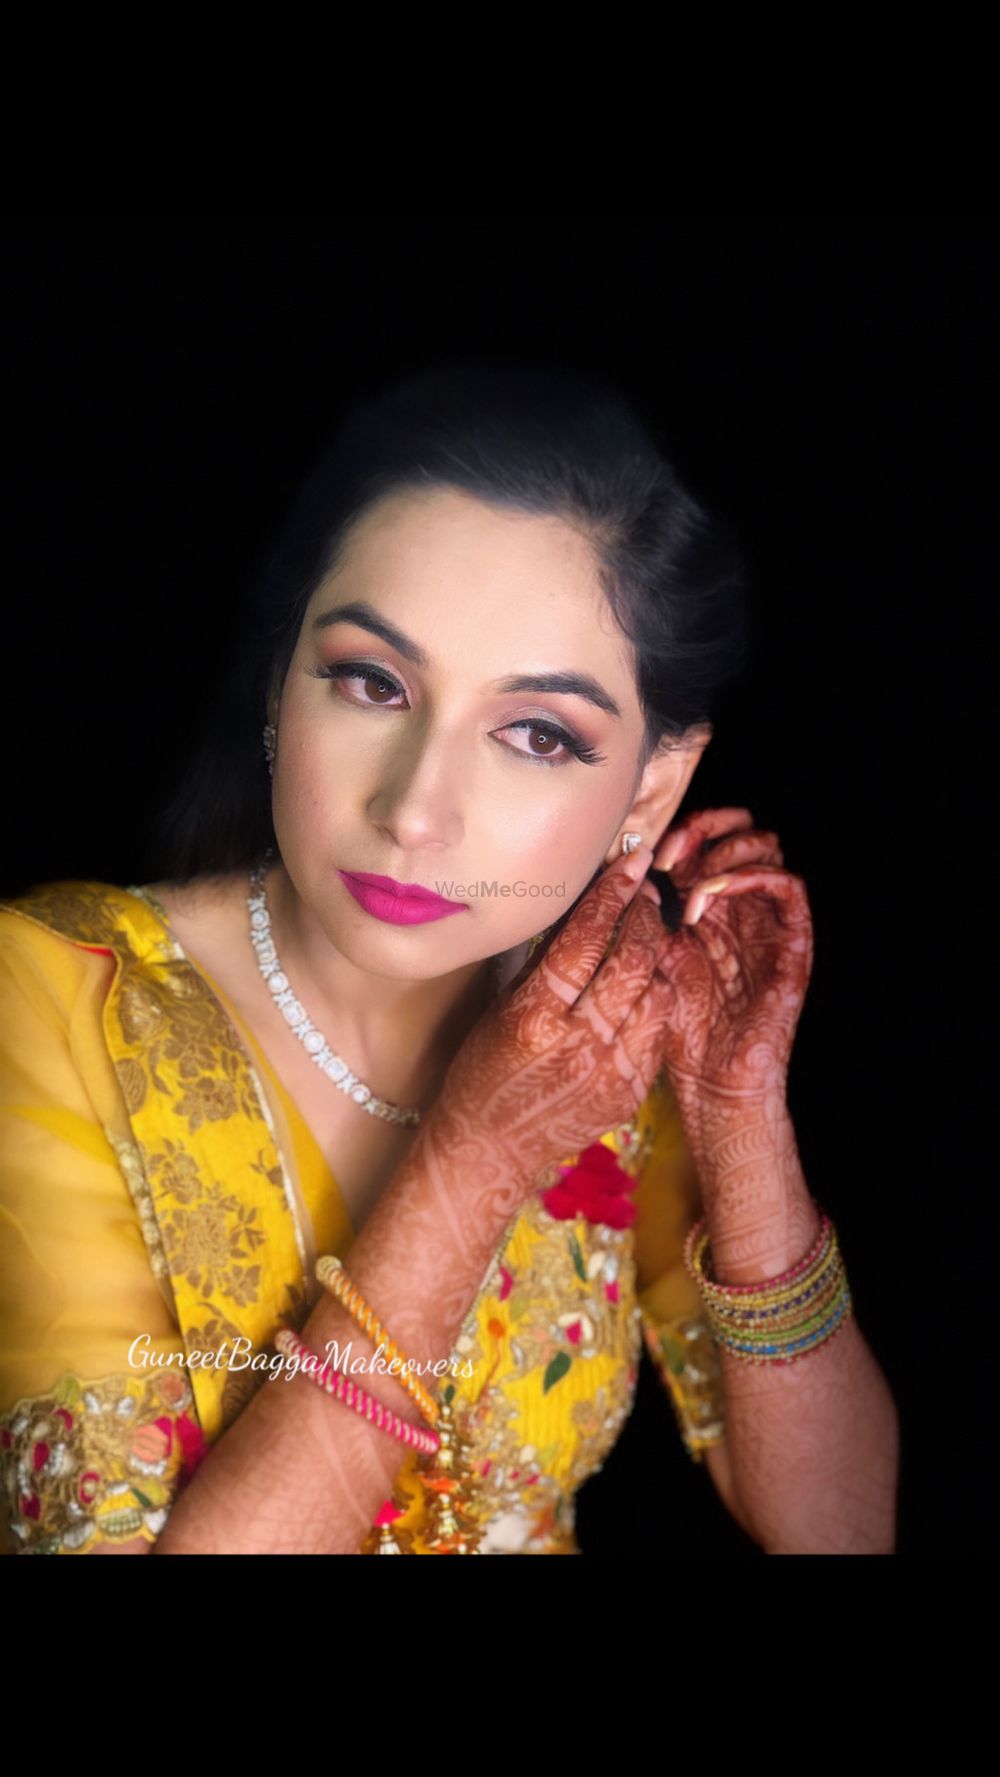 Photo From Engagement/Reception Looks  - By Guneet Bagga Makeovers